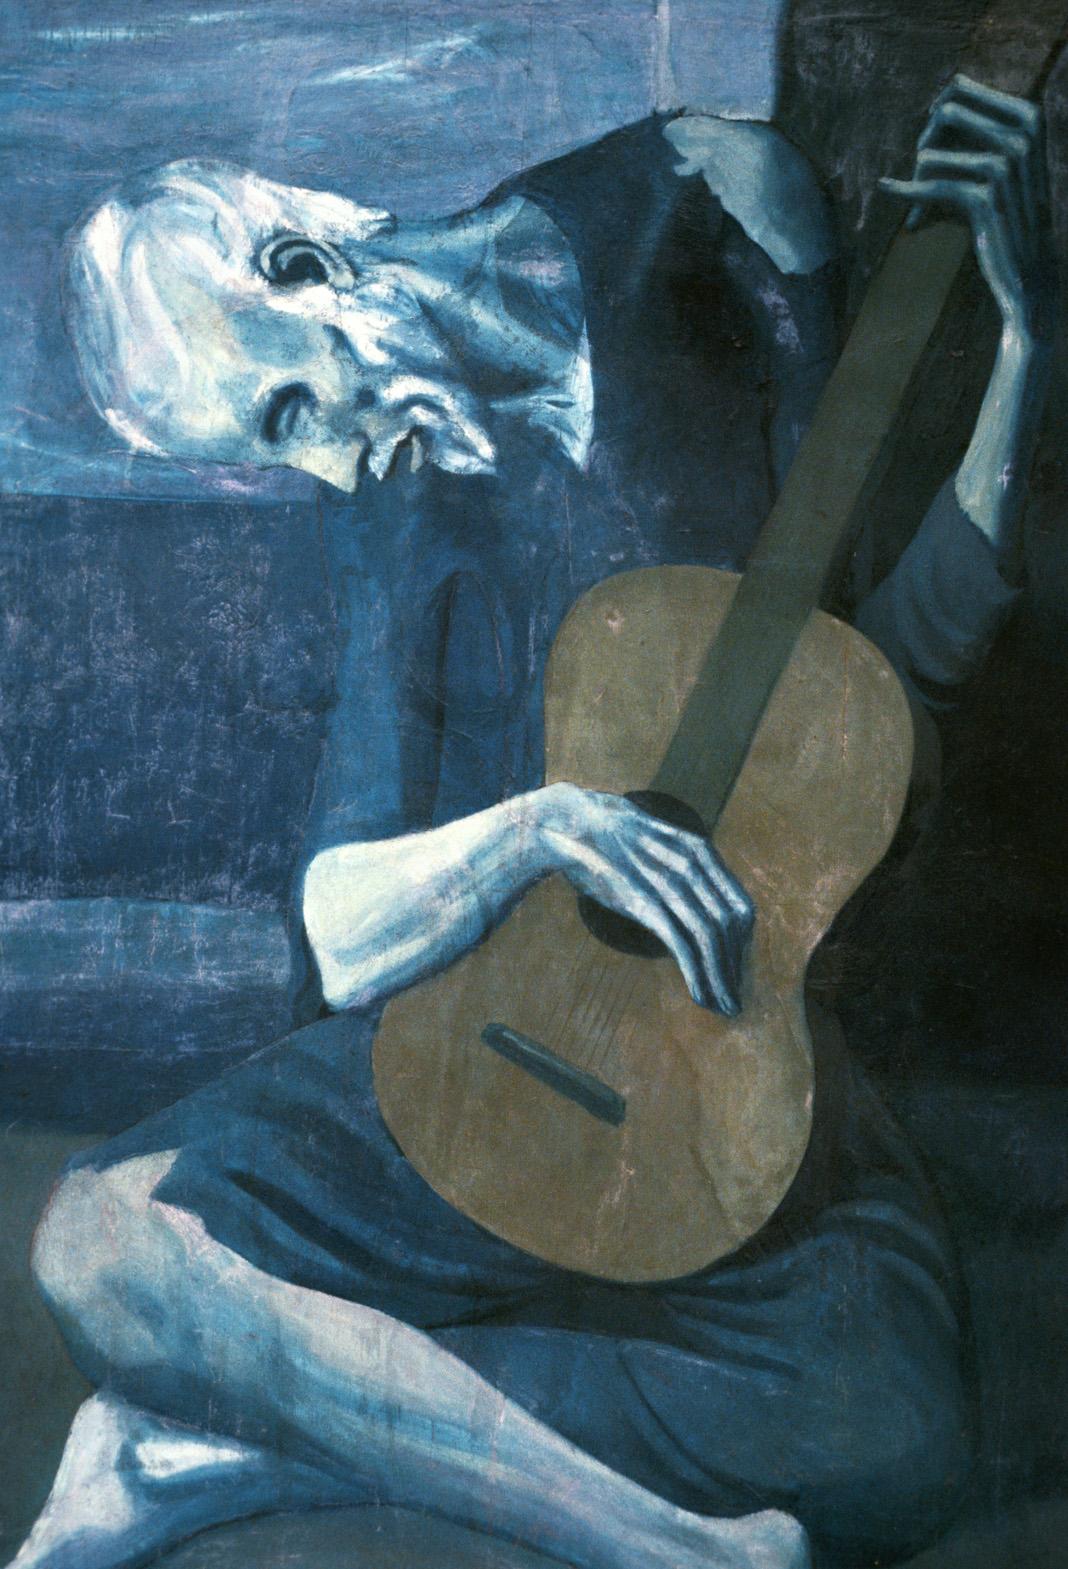 The Old Guitarist by Pablo Picasso - 1903 - 122.9 x 82.6 cm private collection